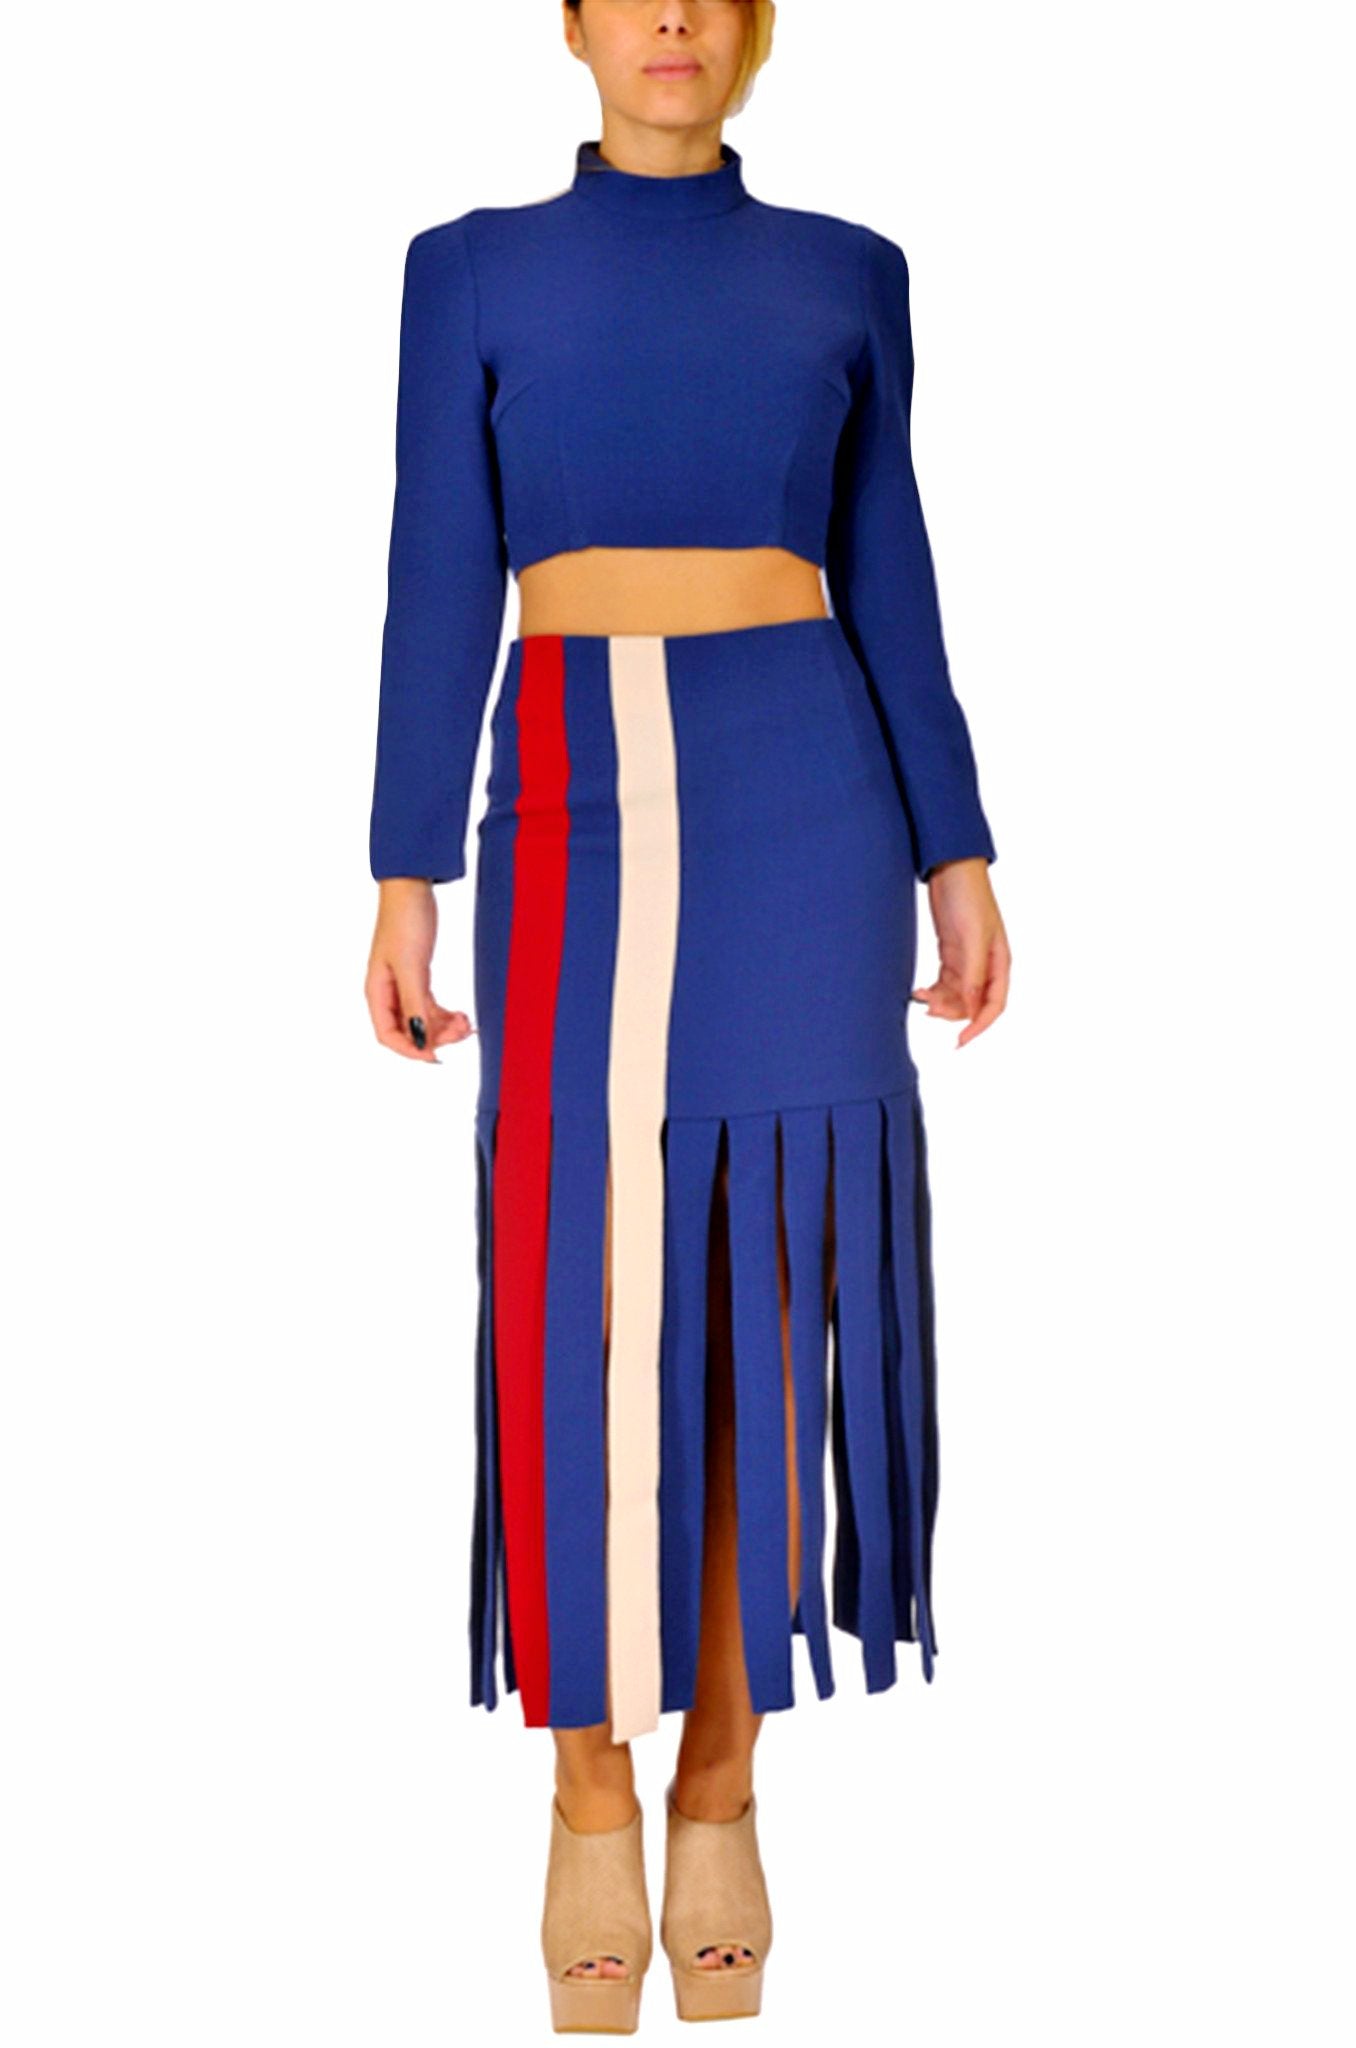 Navy Blue Skirt with Ribbons - 80% off